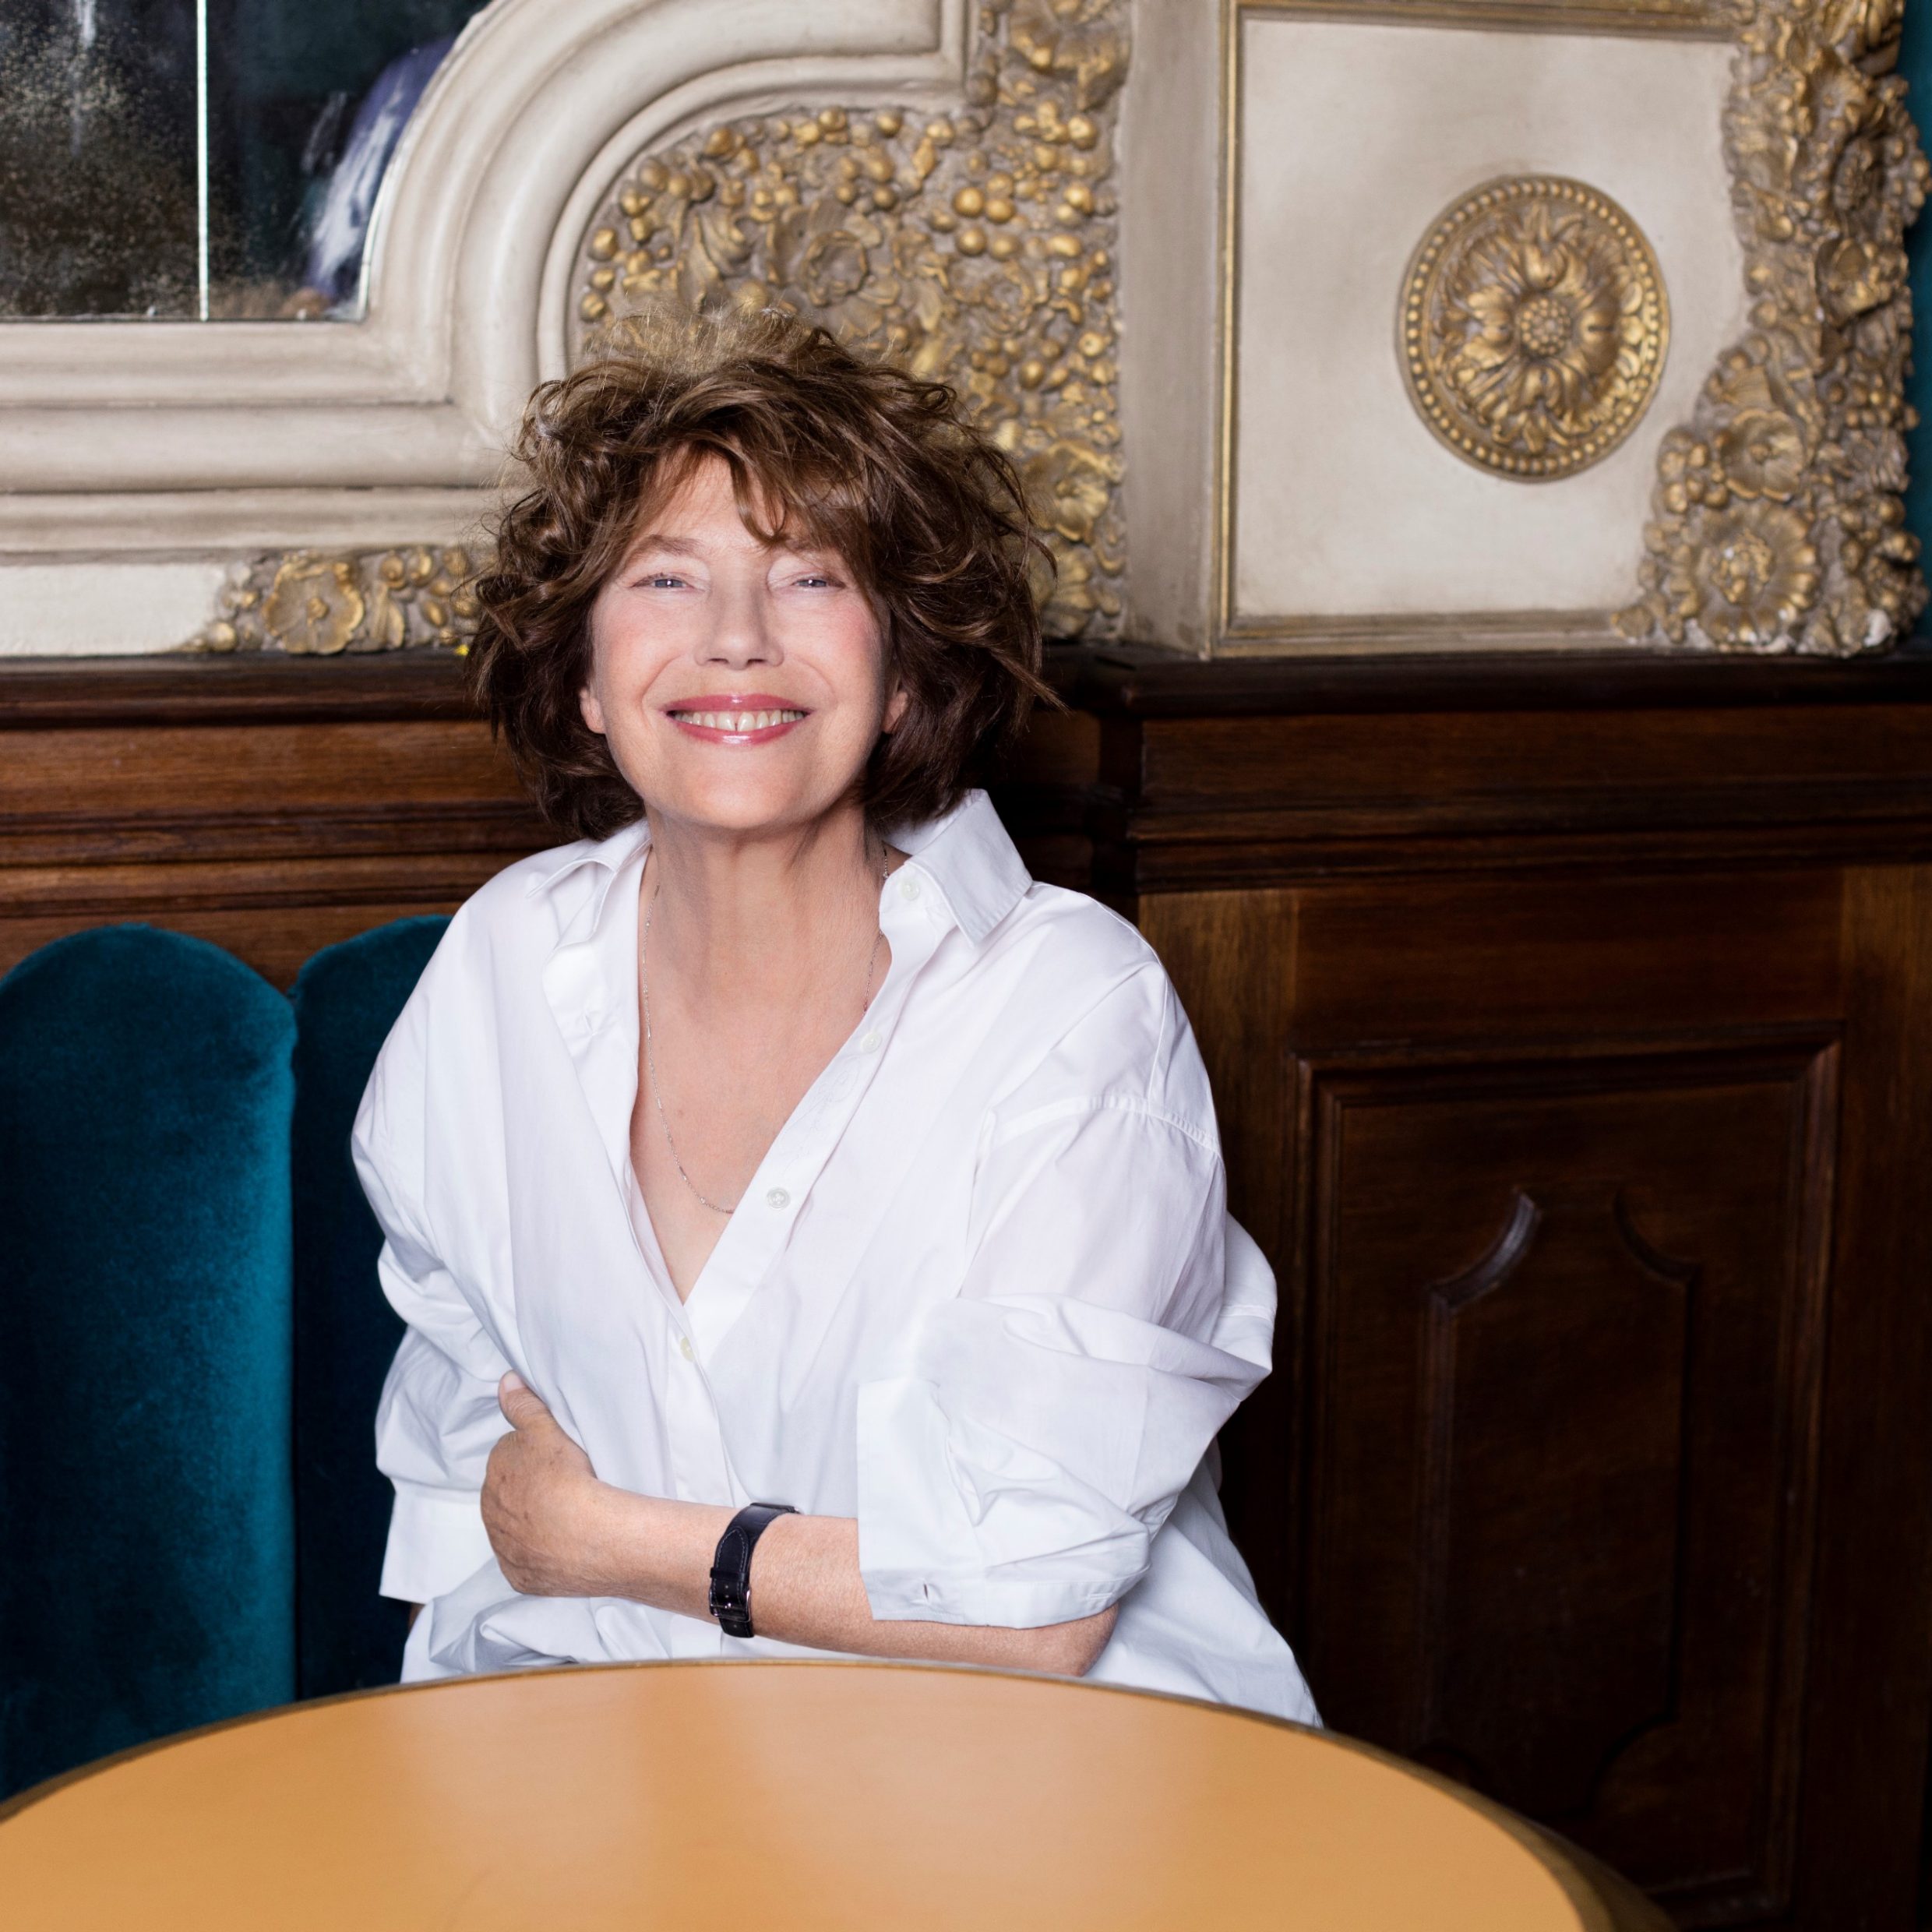 Jane Birkin: “The important things in a woman's life happen at 40” – Swiss  Life Group